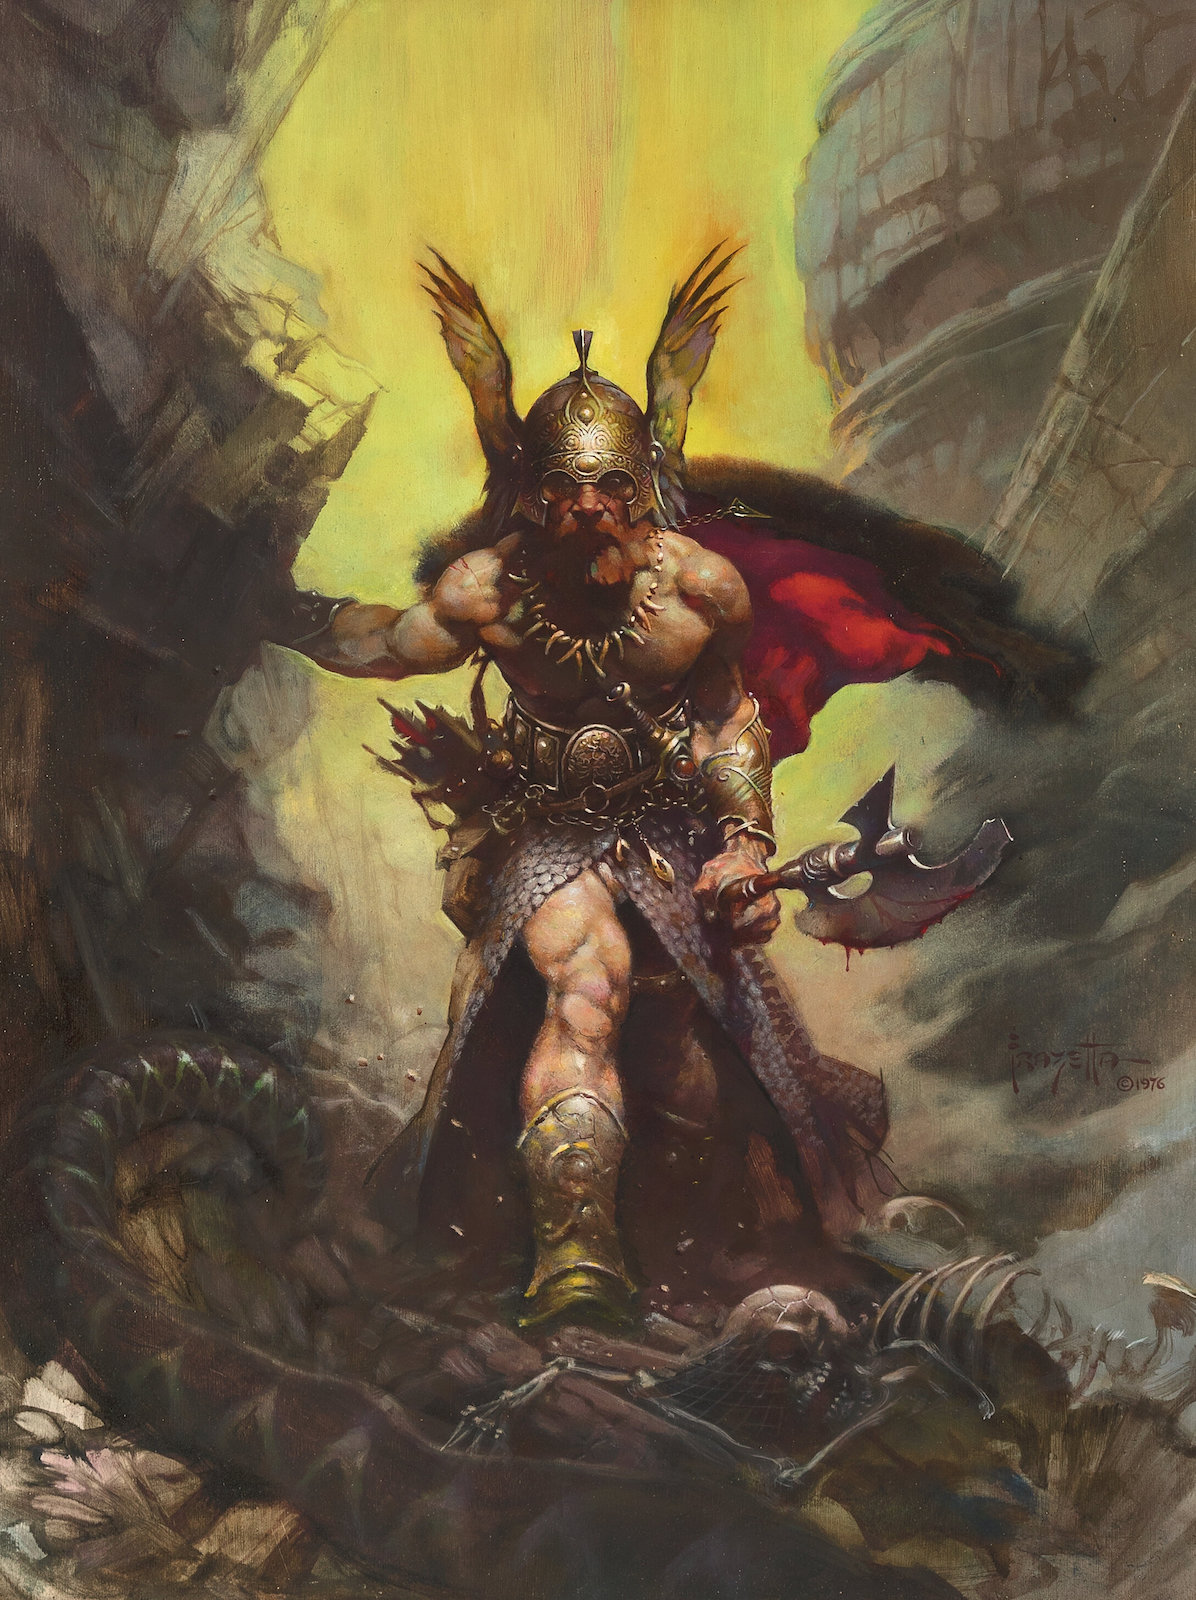 A Frank Frazetta Painting of a Brawny Warrior Sold for $6 Million ...